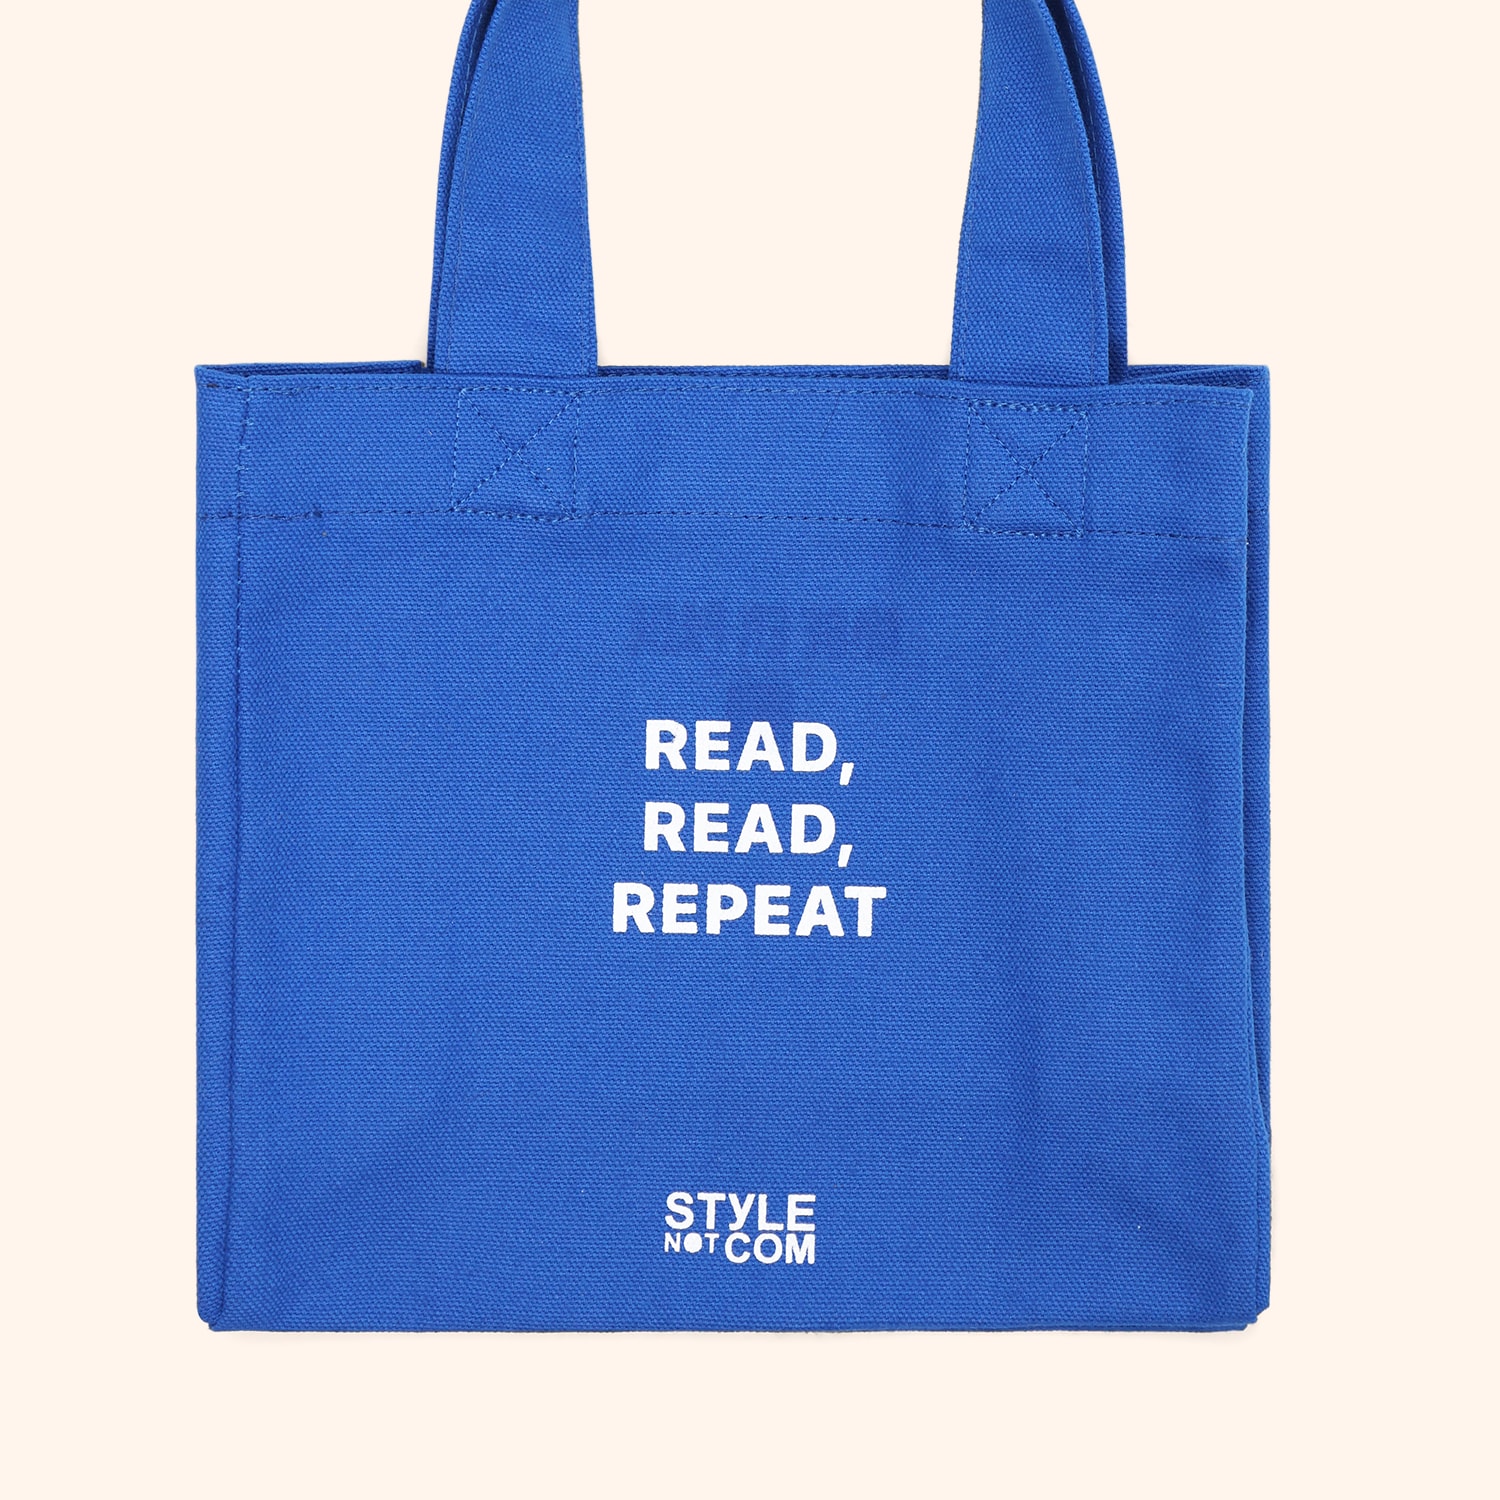 Tote bag STYLE NOT COM